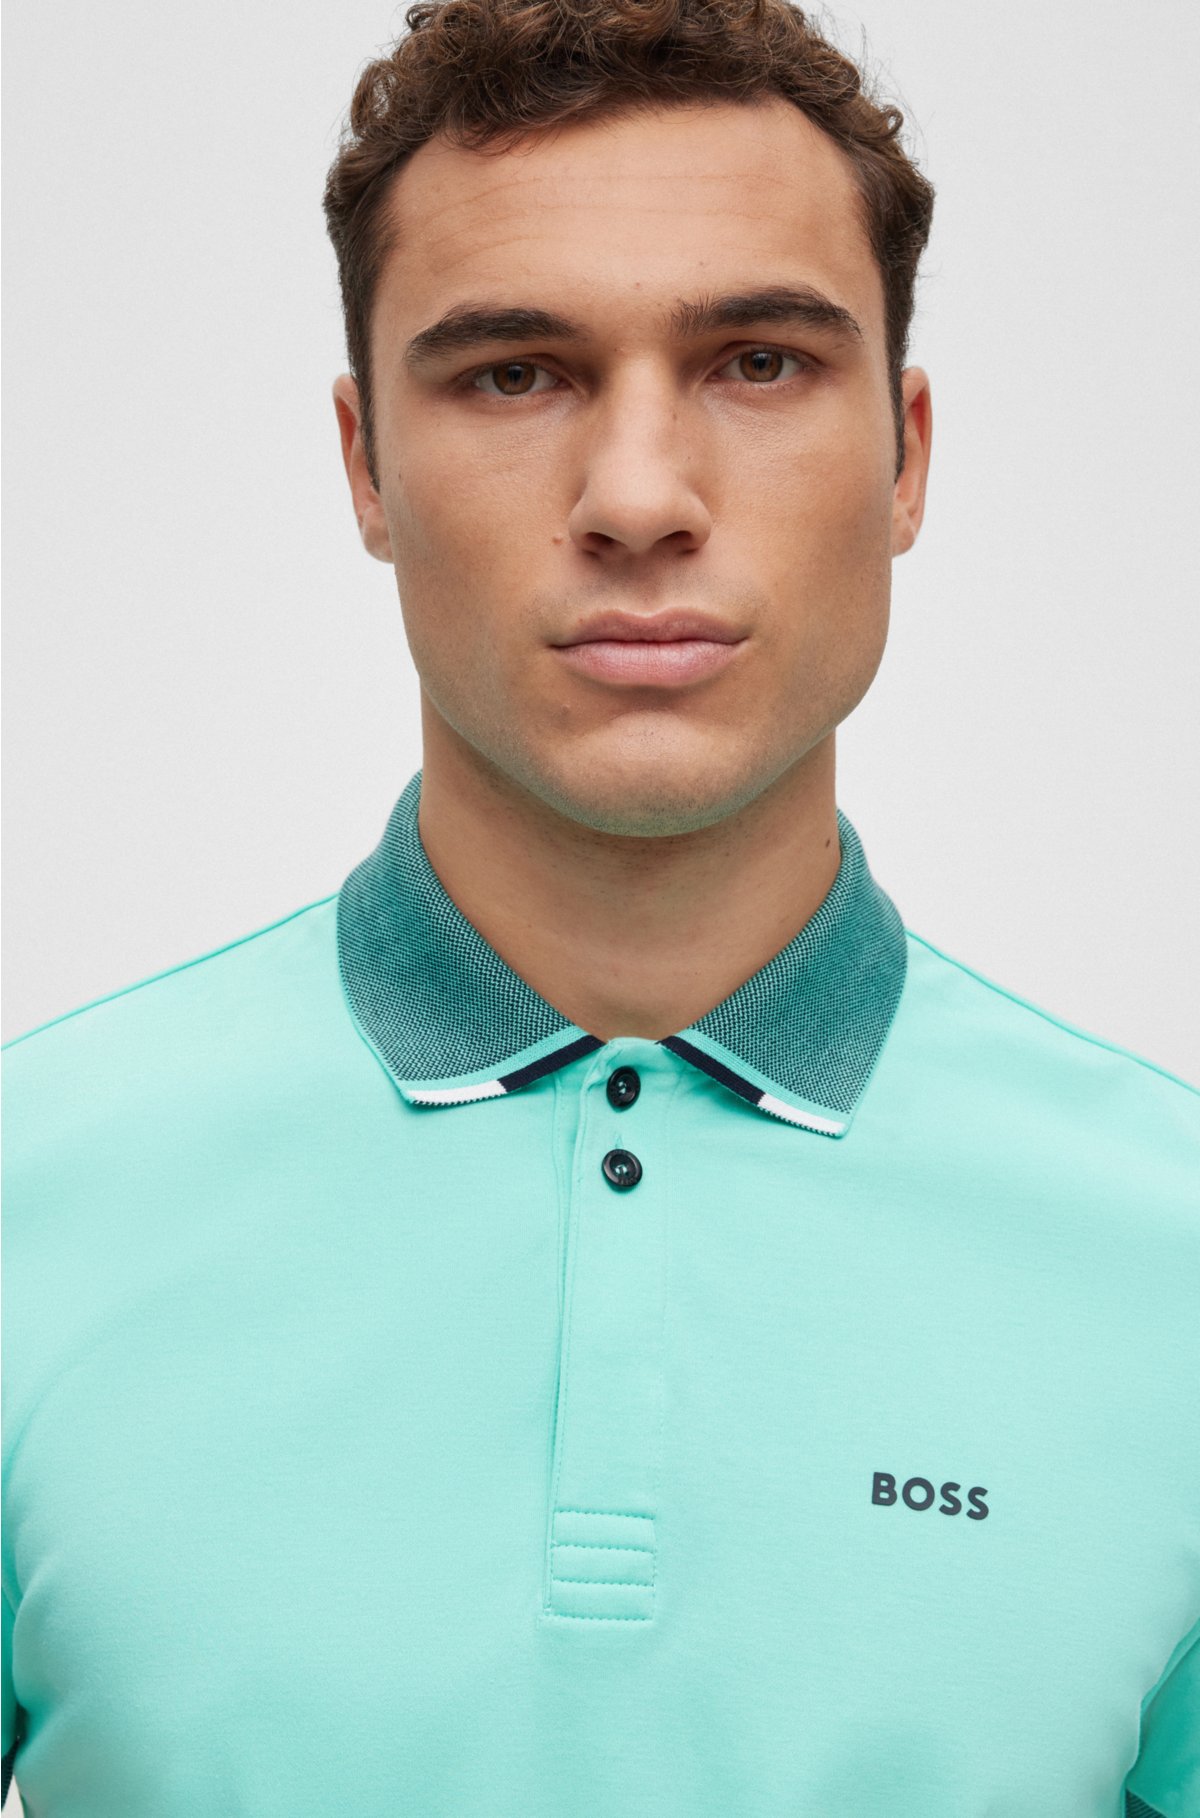 Fange Ødelægge Moden BOSS - Interlock-cotton polo shirt with structured collar and logo